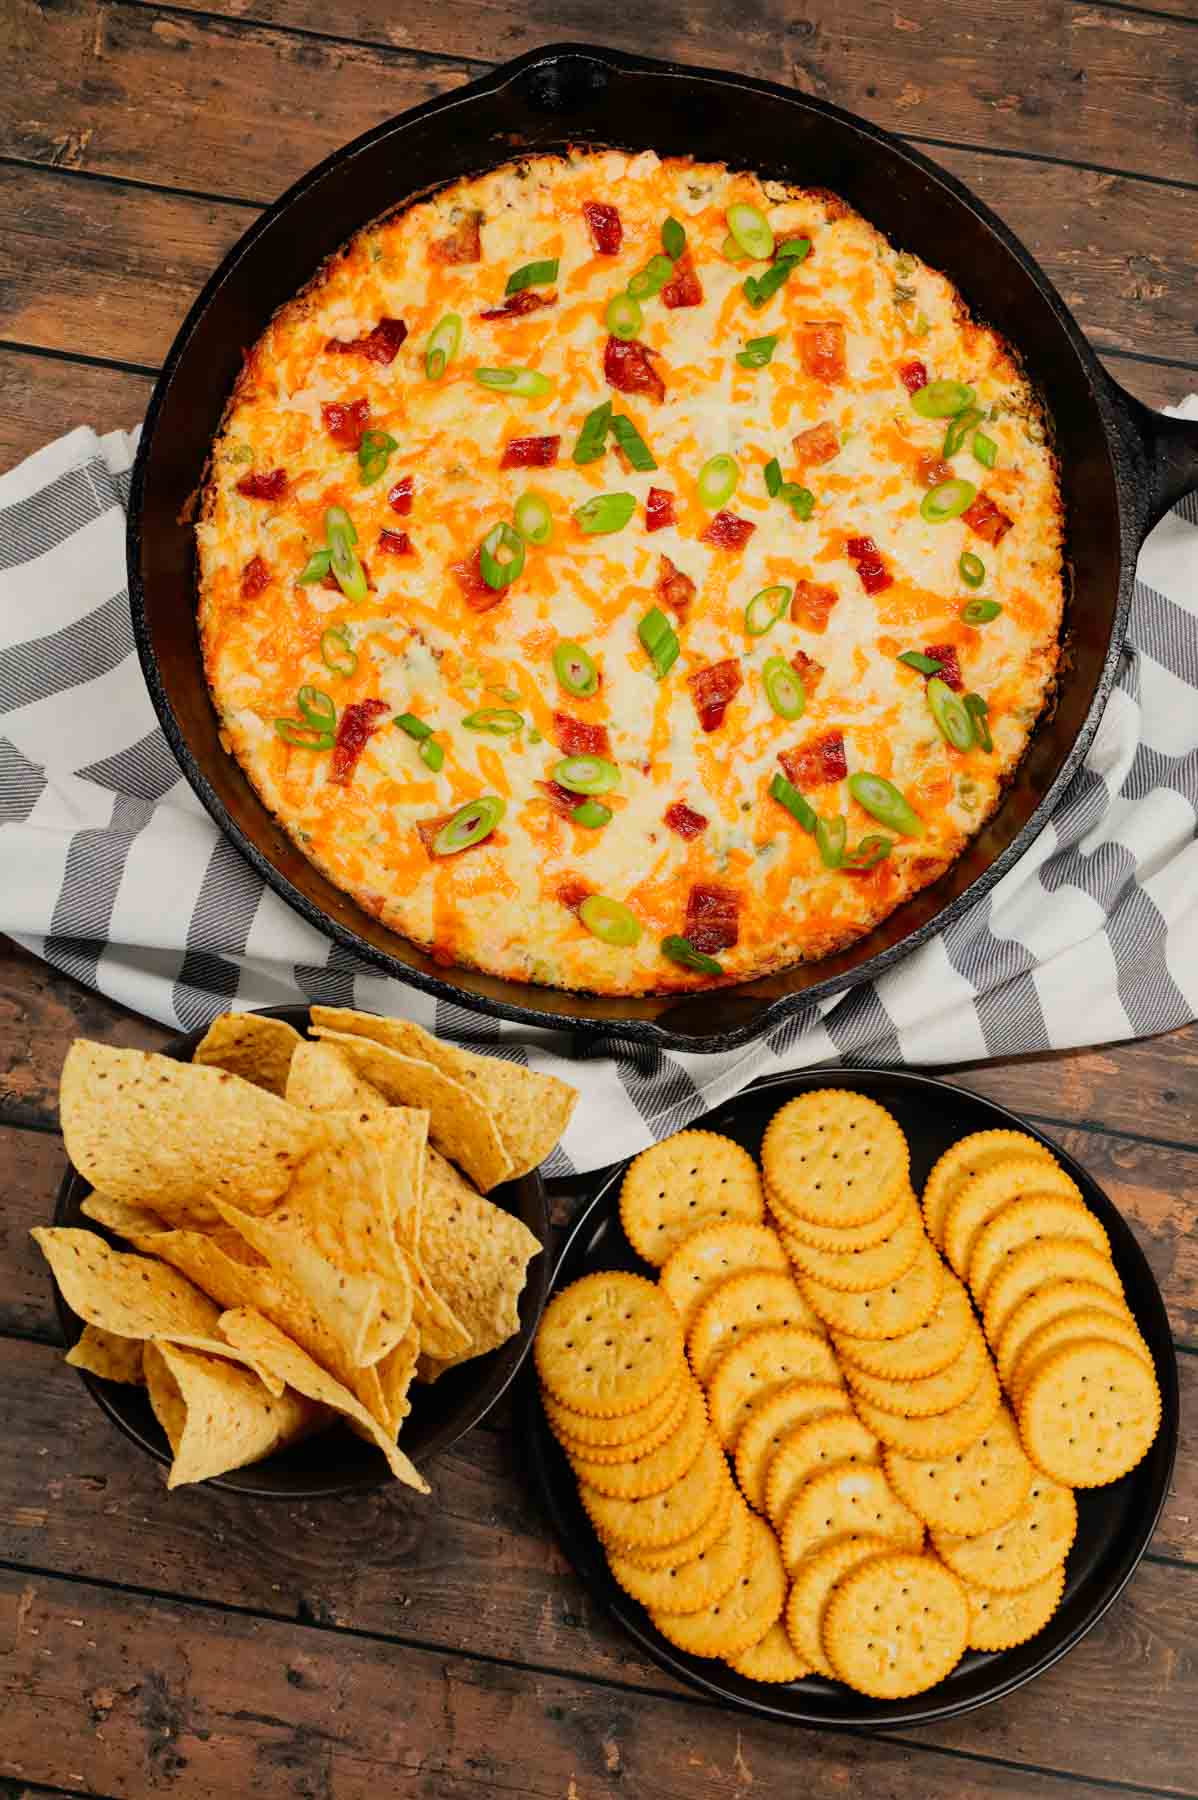 Crack Chicken Dip is a delicious baked dip loaded with shredded chicken, cream cheese, ranch dressing, bacon, green onions and cheddar cheese.